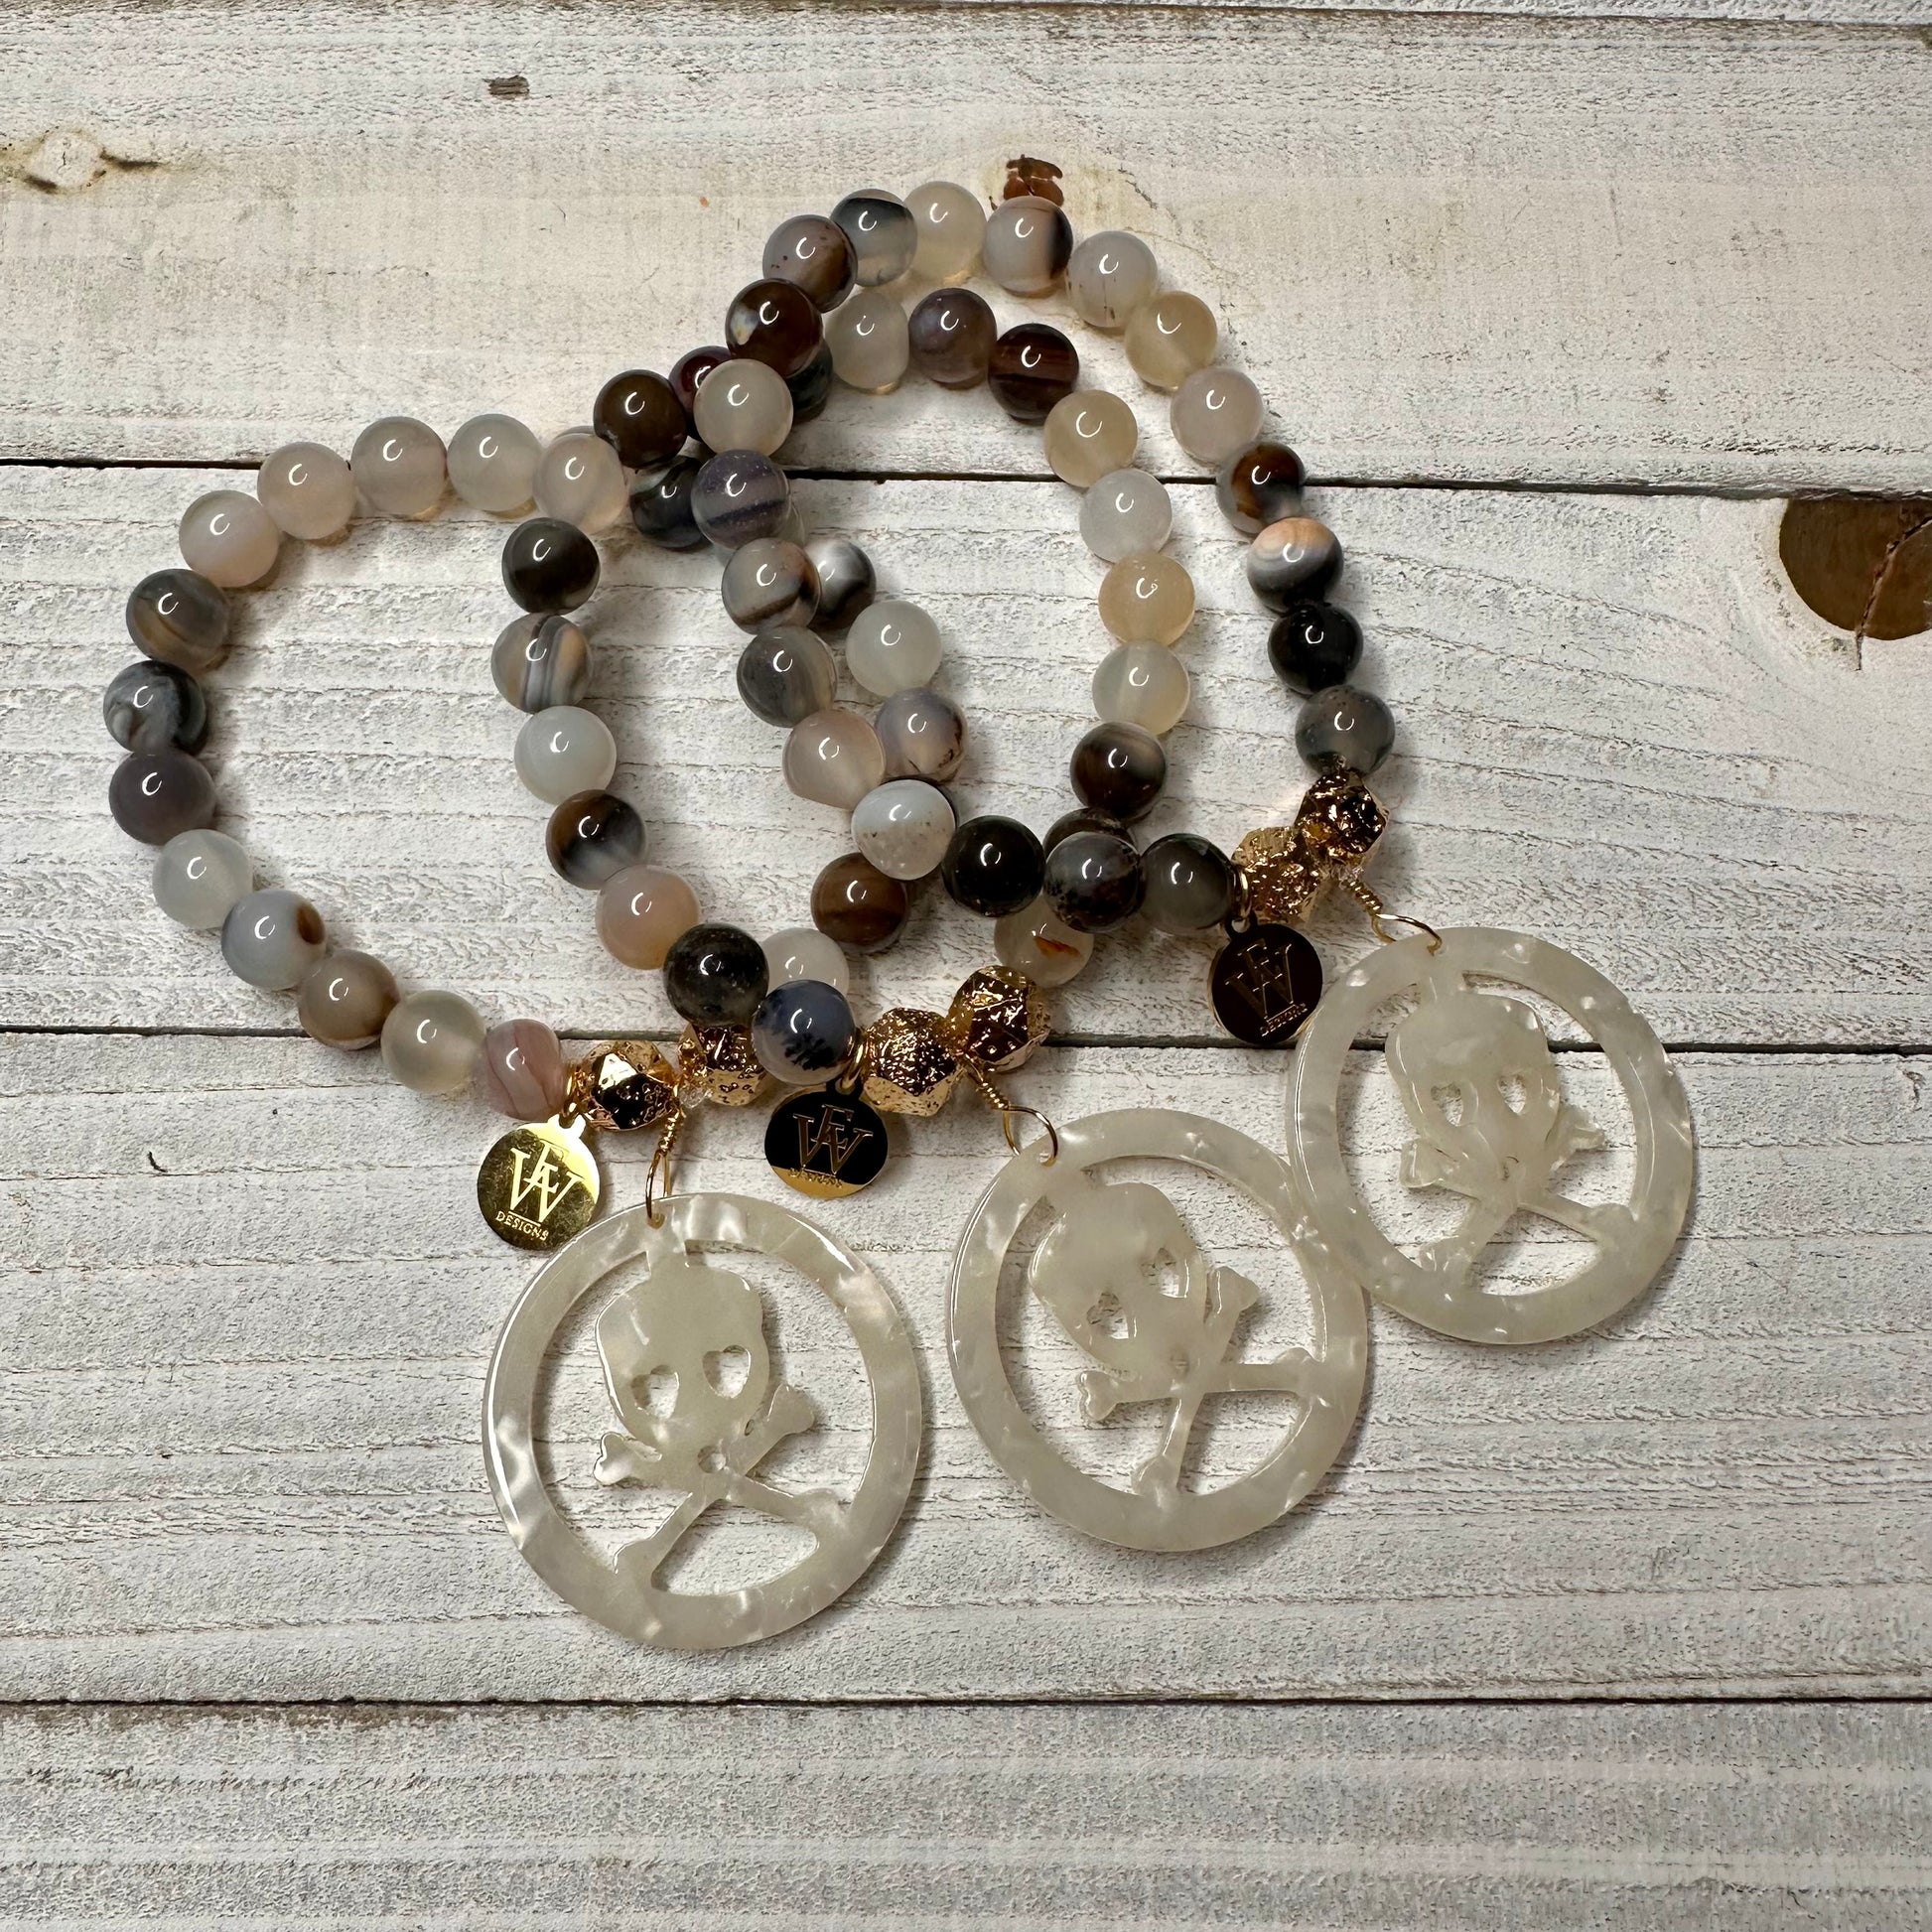 Agate Beads Bracelet with an acetate crossed bones and skull charm